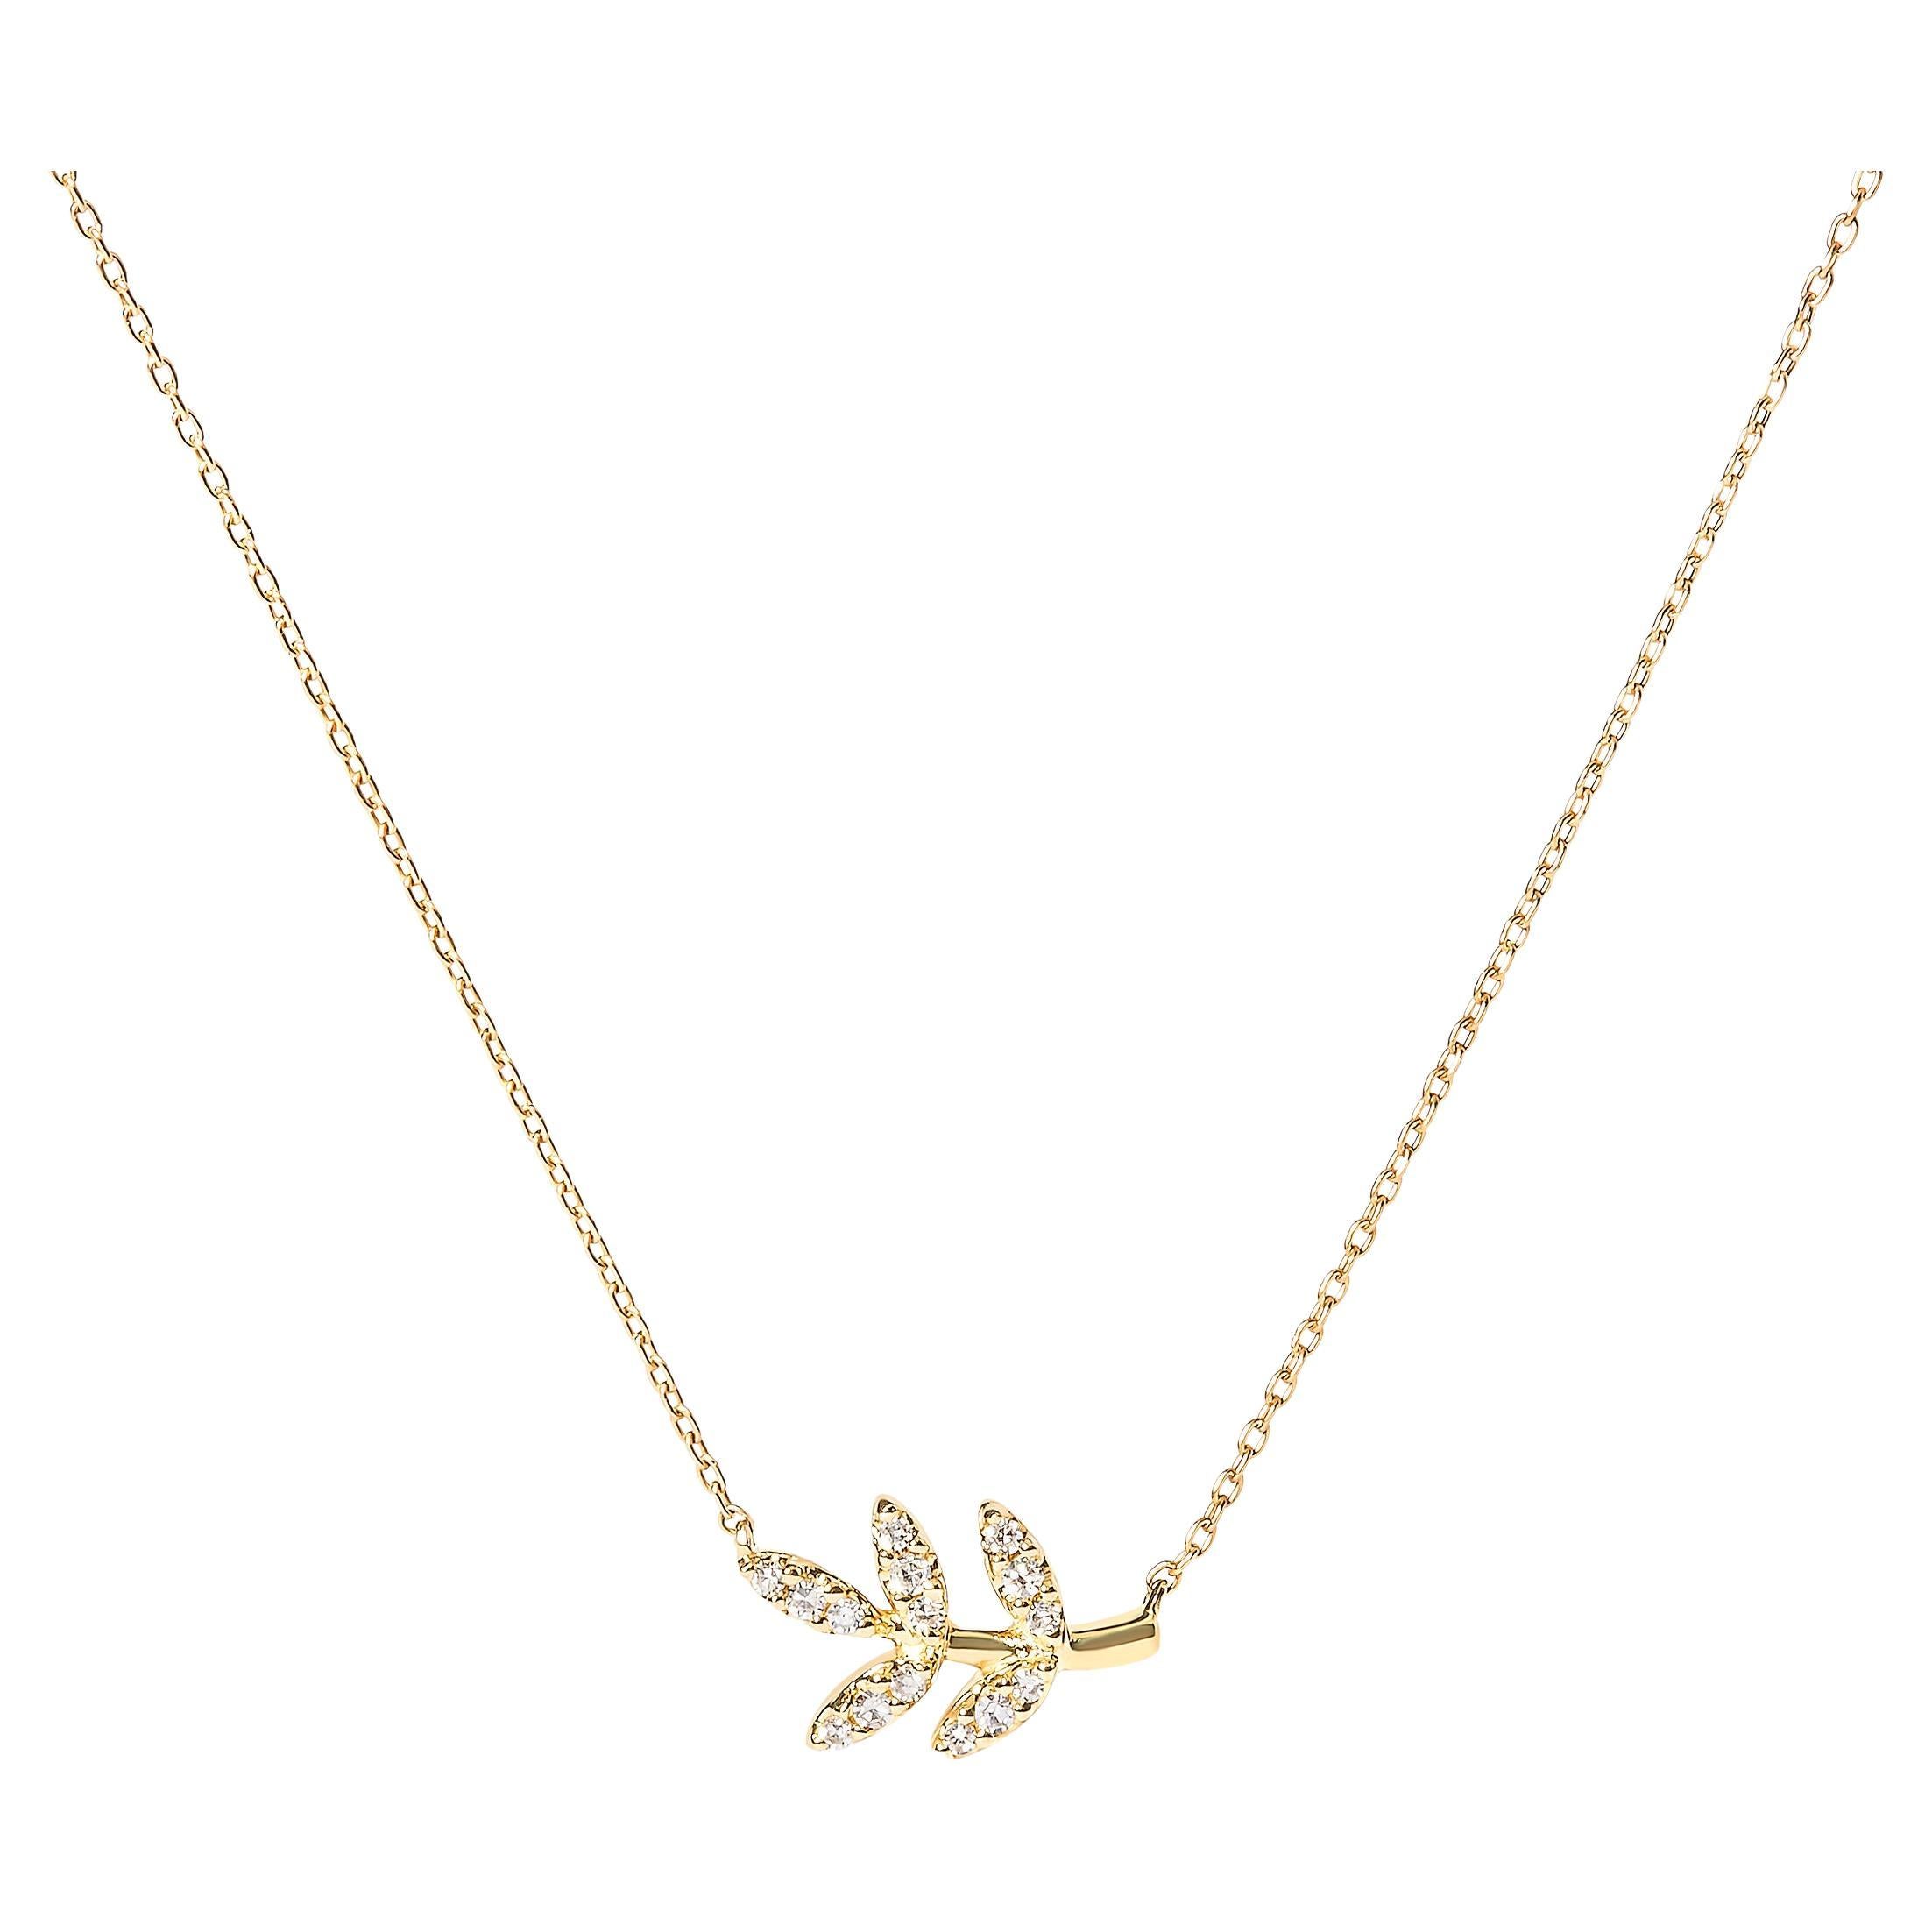 10K Yellow Gold 1/10 Carat Diamond Leaf and Branch Pendant Necklace For Sale